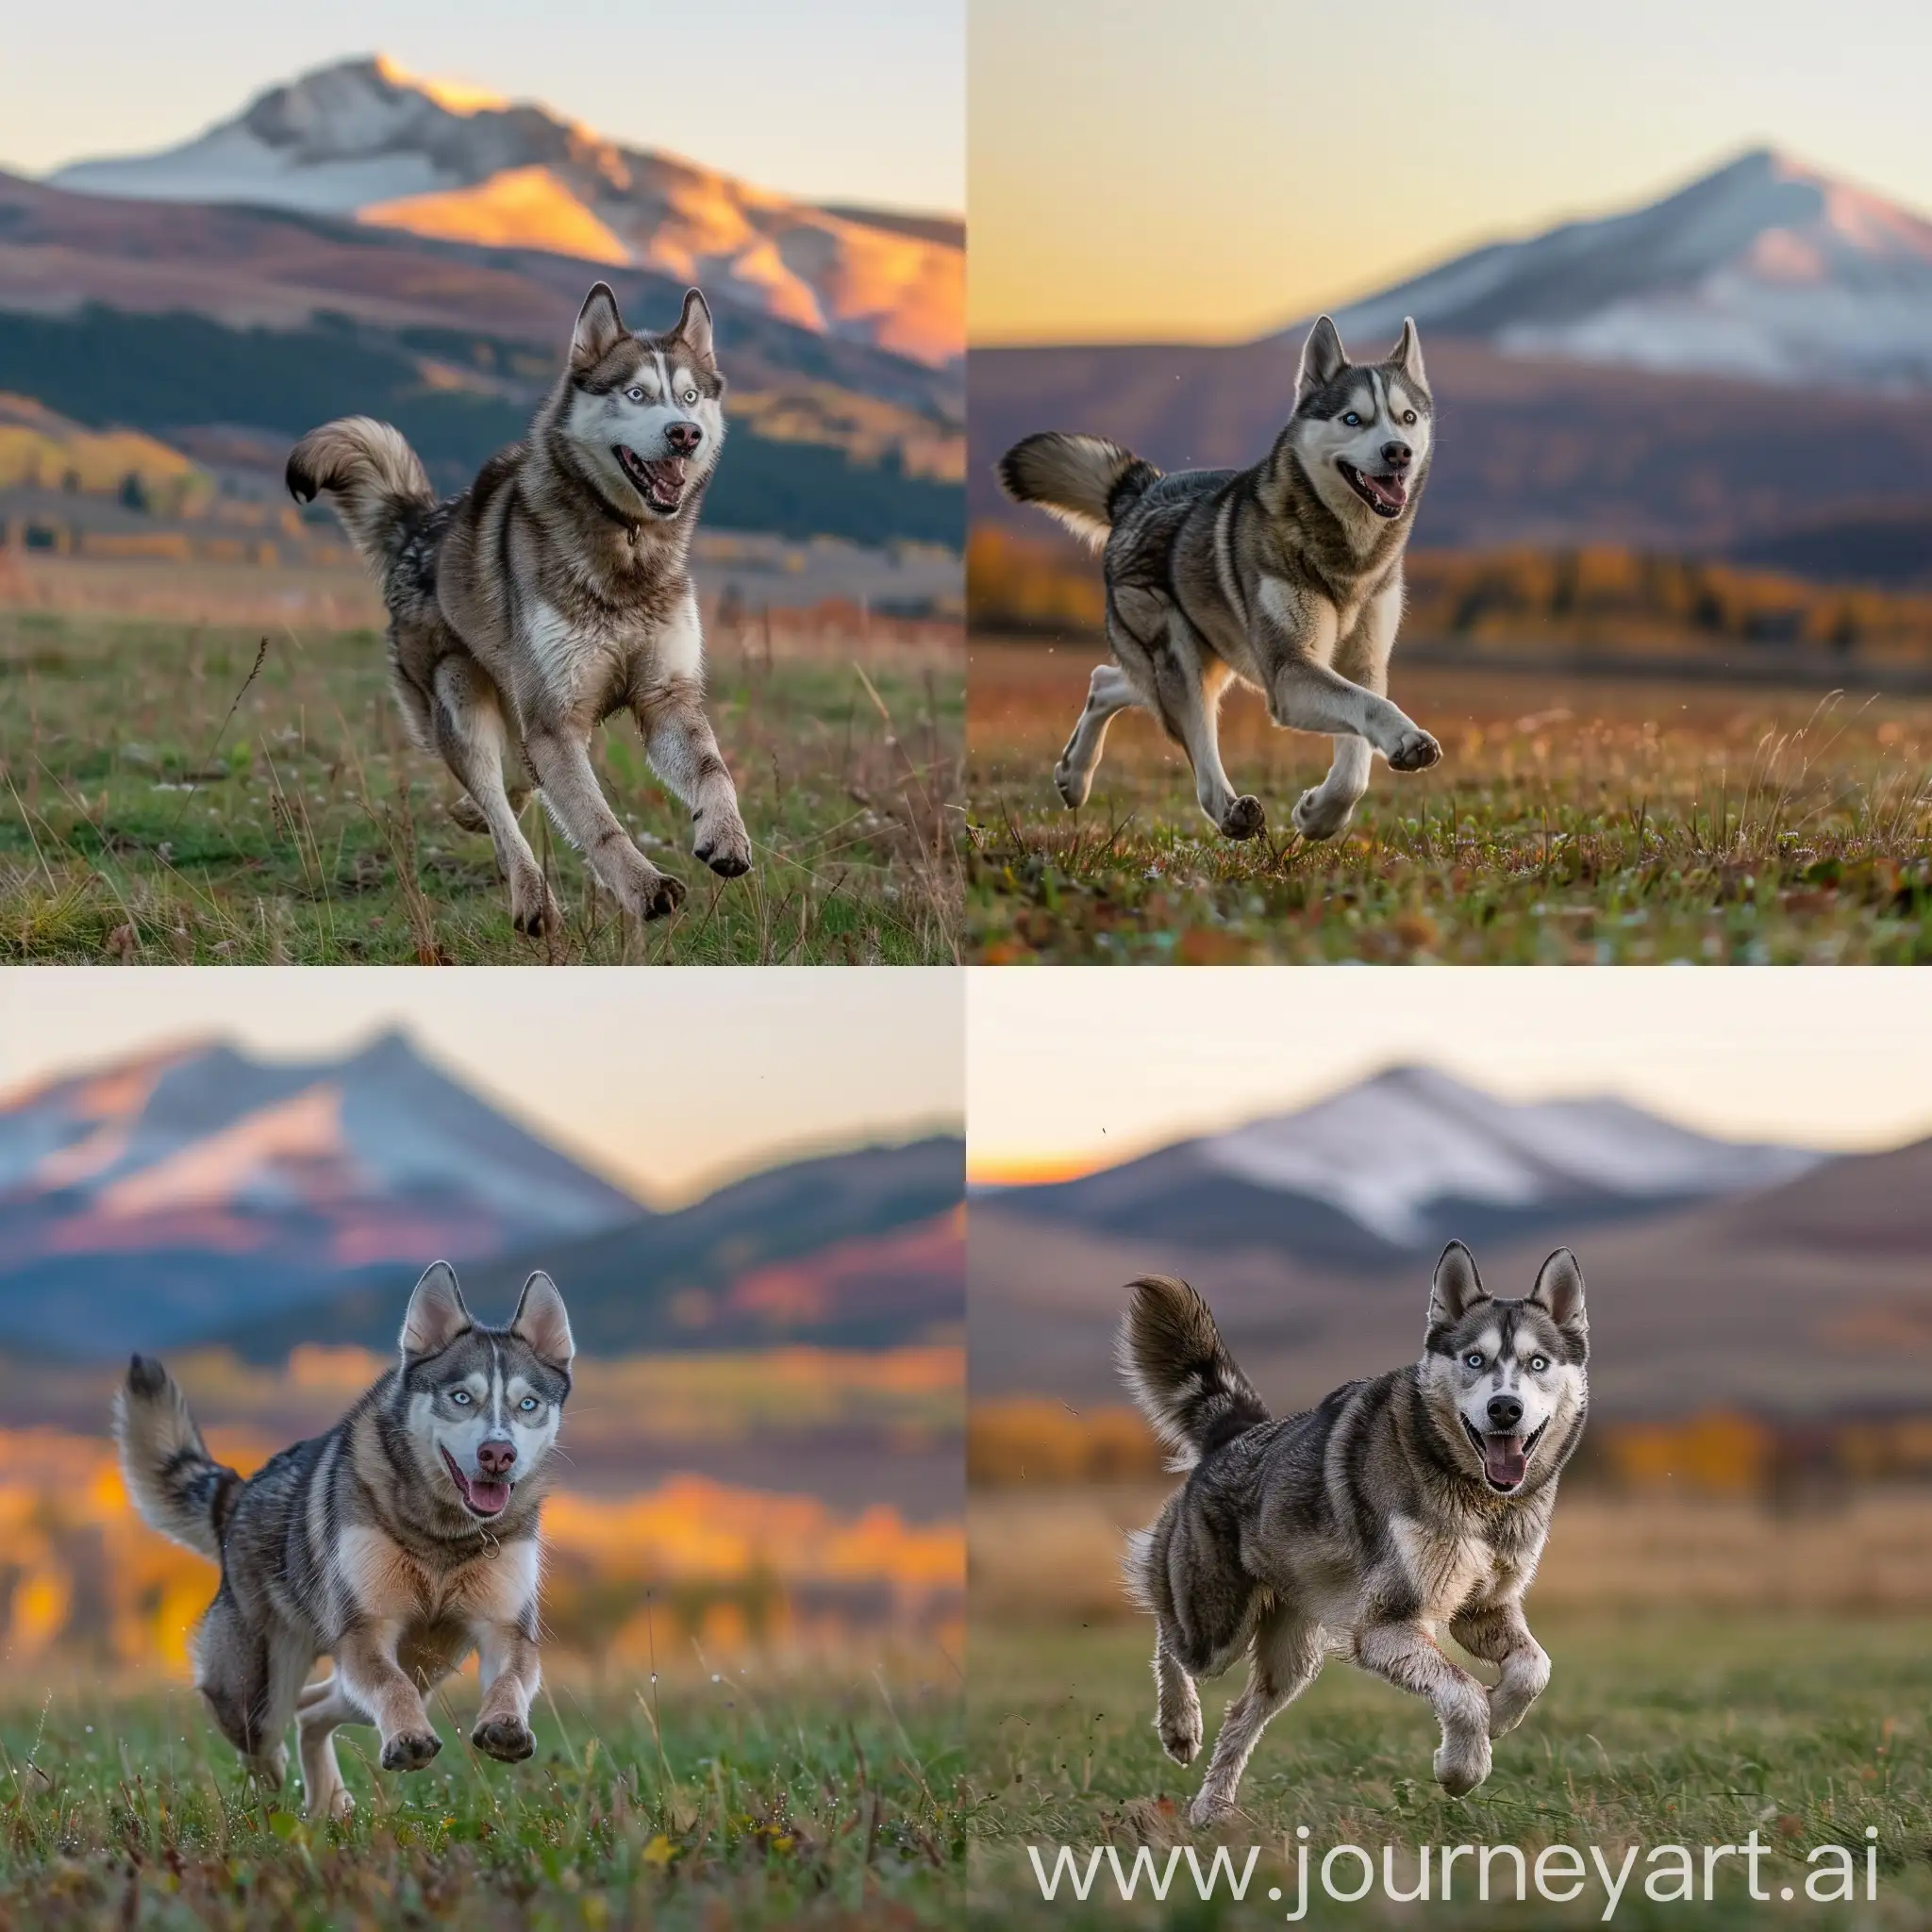 husky dog with gray and brown fur with small white areas happily running with it's legs are visible and the tail can be seen as well, through a field in autumn green grass around where a snow mountain can be seen in the backdrop and the sky is clear on a sunny evening almost before twilight orange and yellow glow as seen by a telephoto camera lens where the dog is in a distance of about 15 meters

